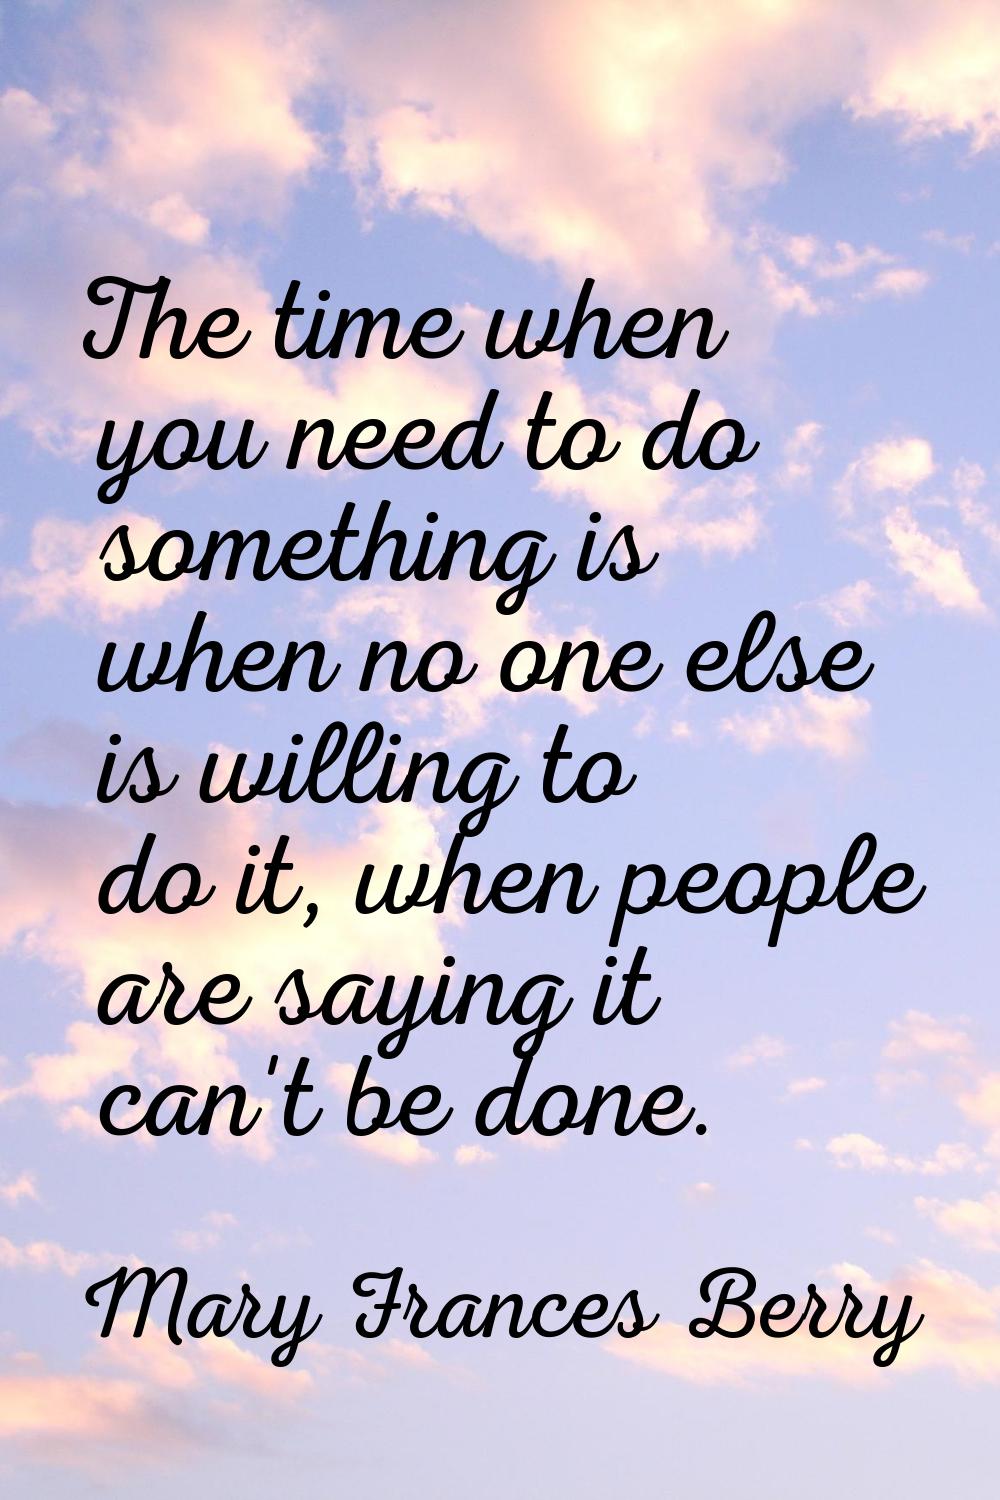 The time when you need to do something is when no one else is willing to do it, when people are say